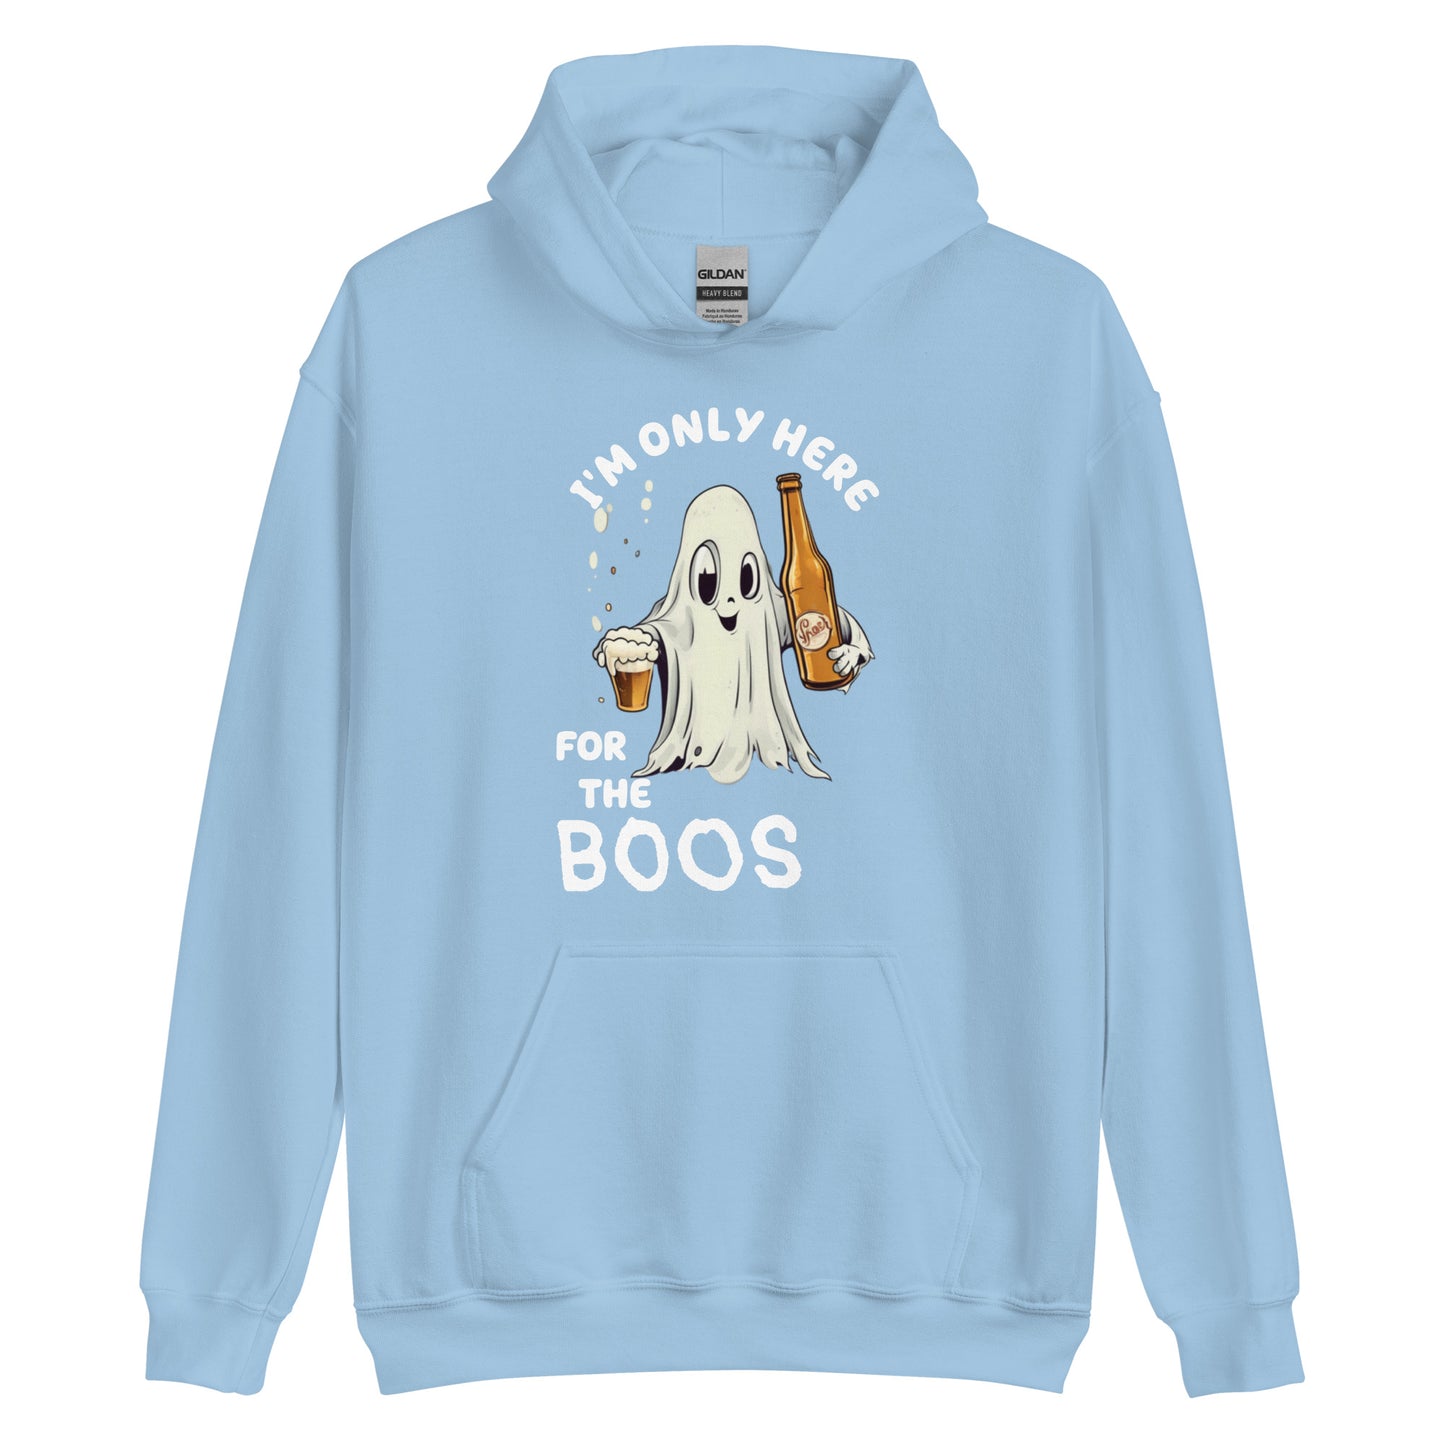 HERE FOR THE BOOS Unisex Hoodie